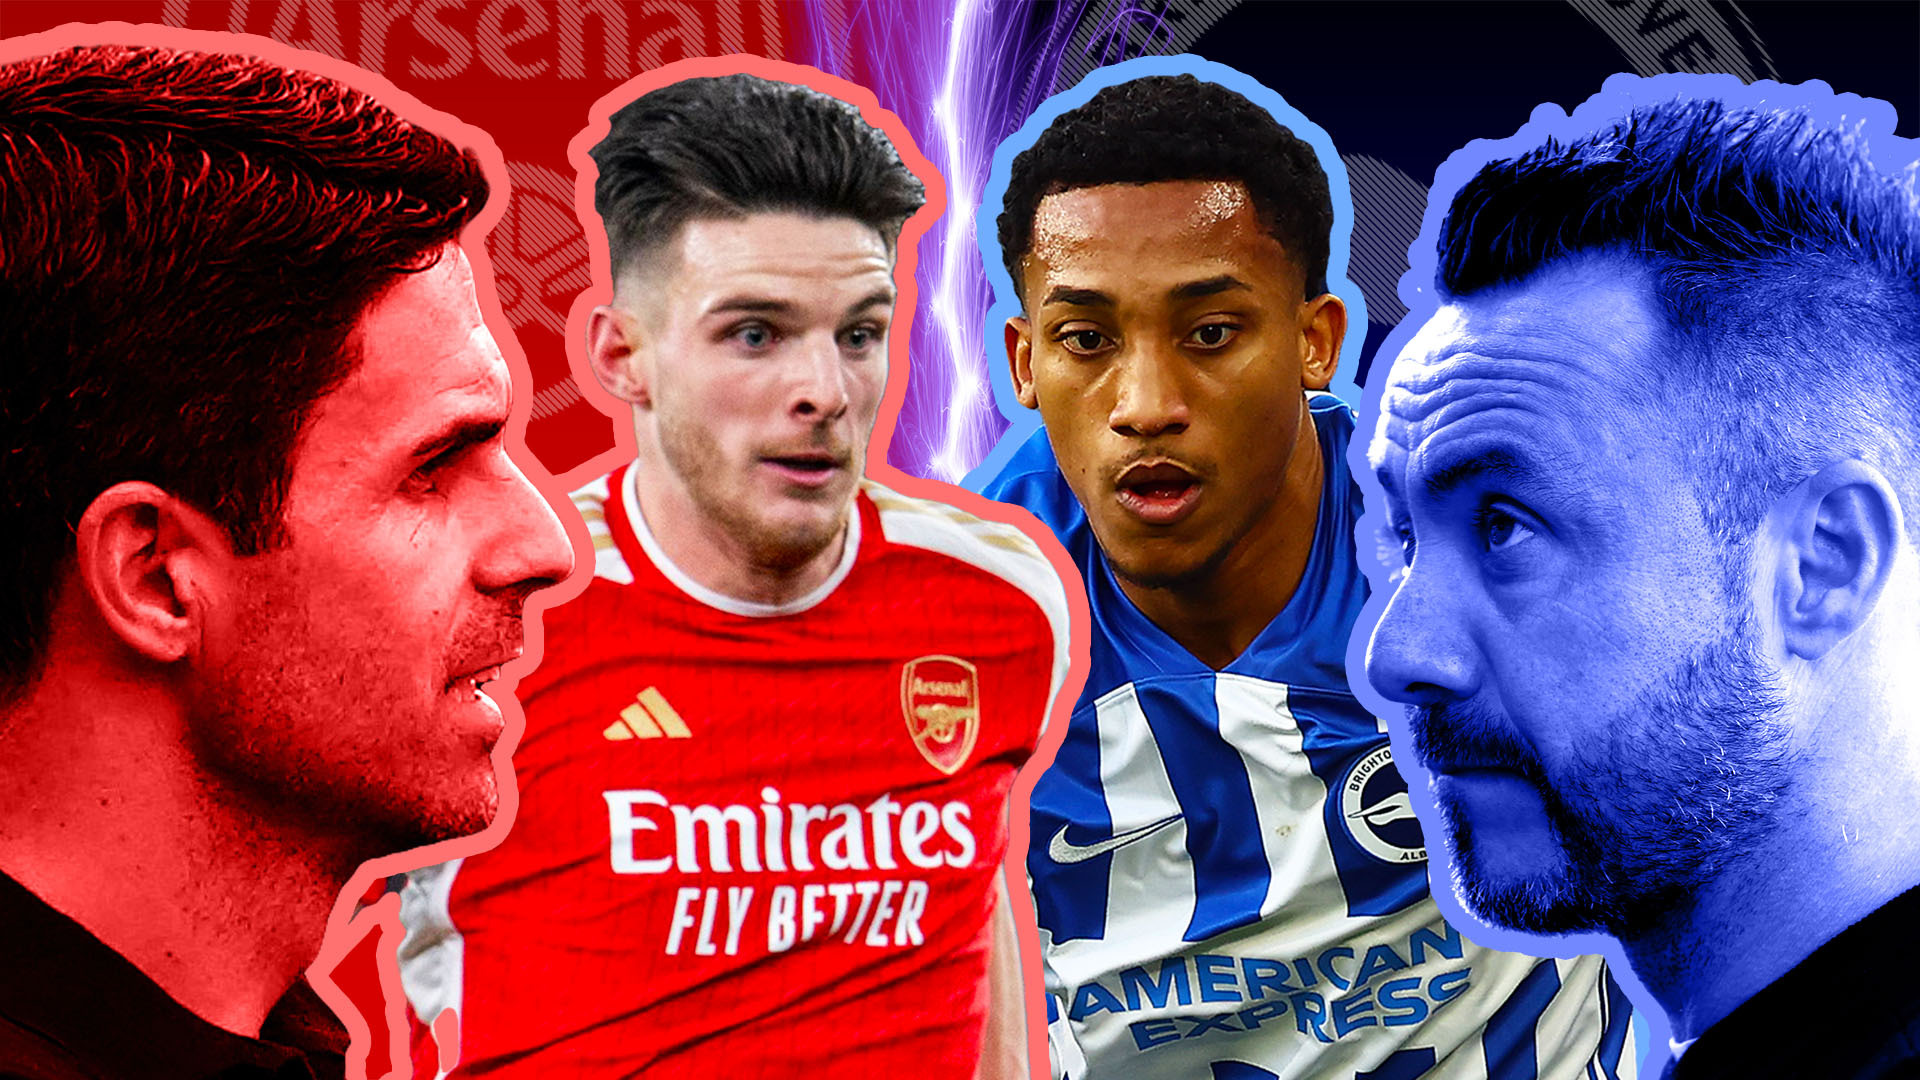 Arsenal vs Brighton LIVE: Gunners looking to leapfrog Premier League leaders Liverpool - preview, team news